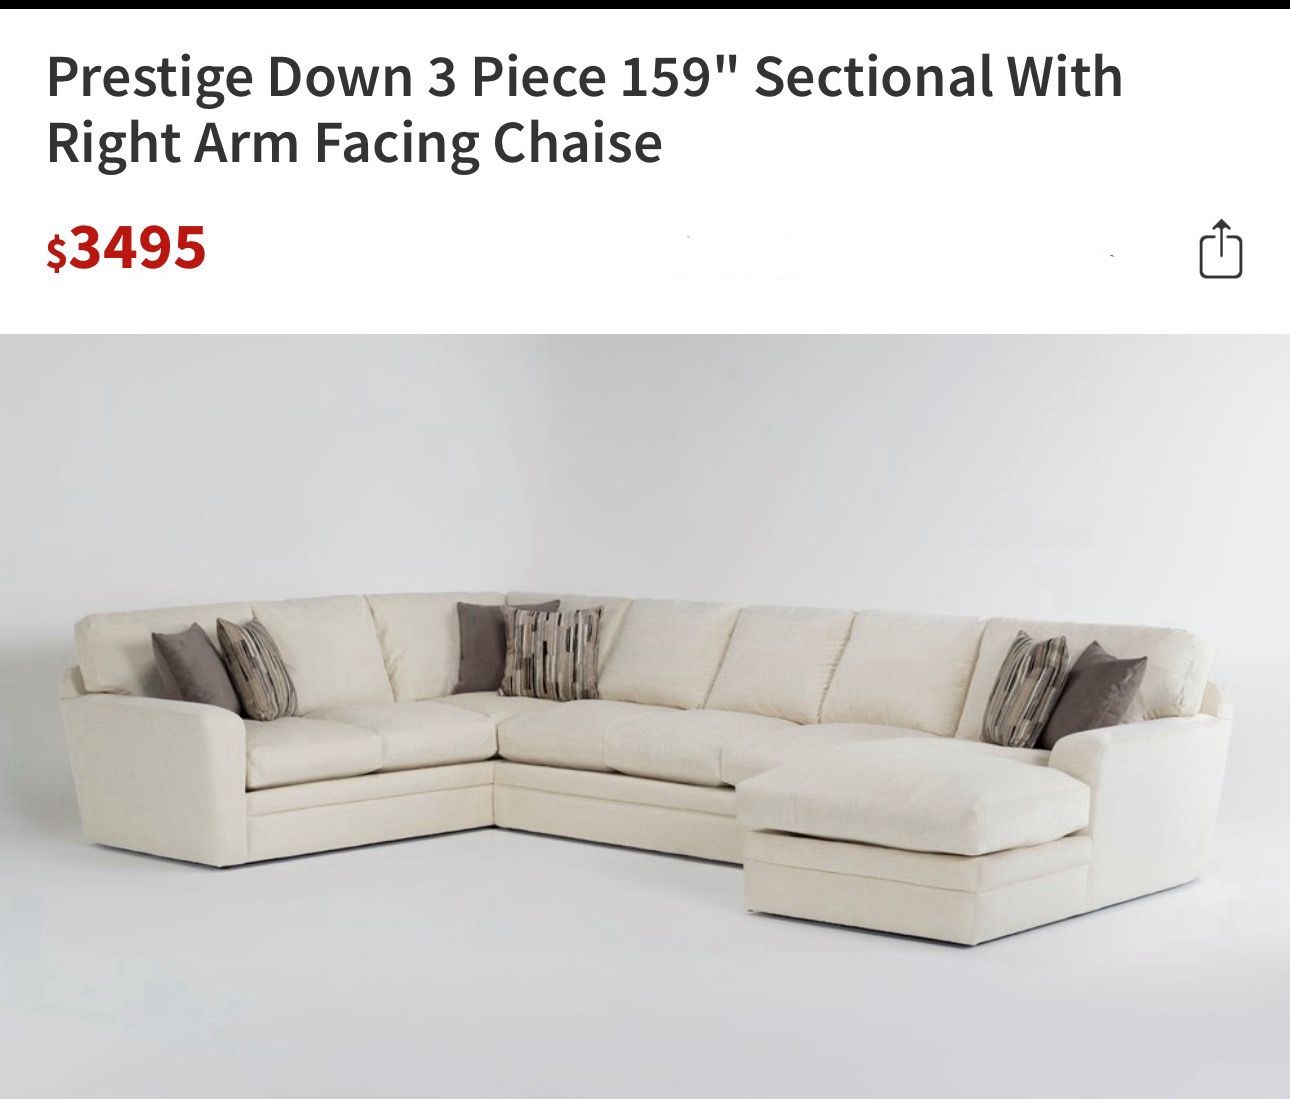 3 Piece 159" Sectional